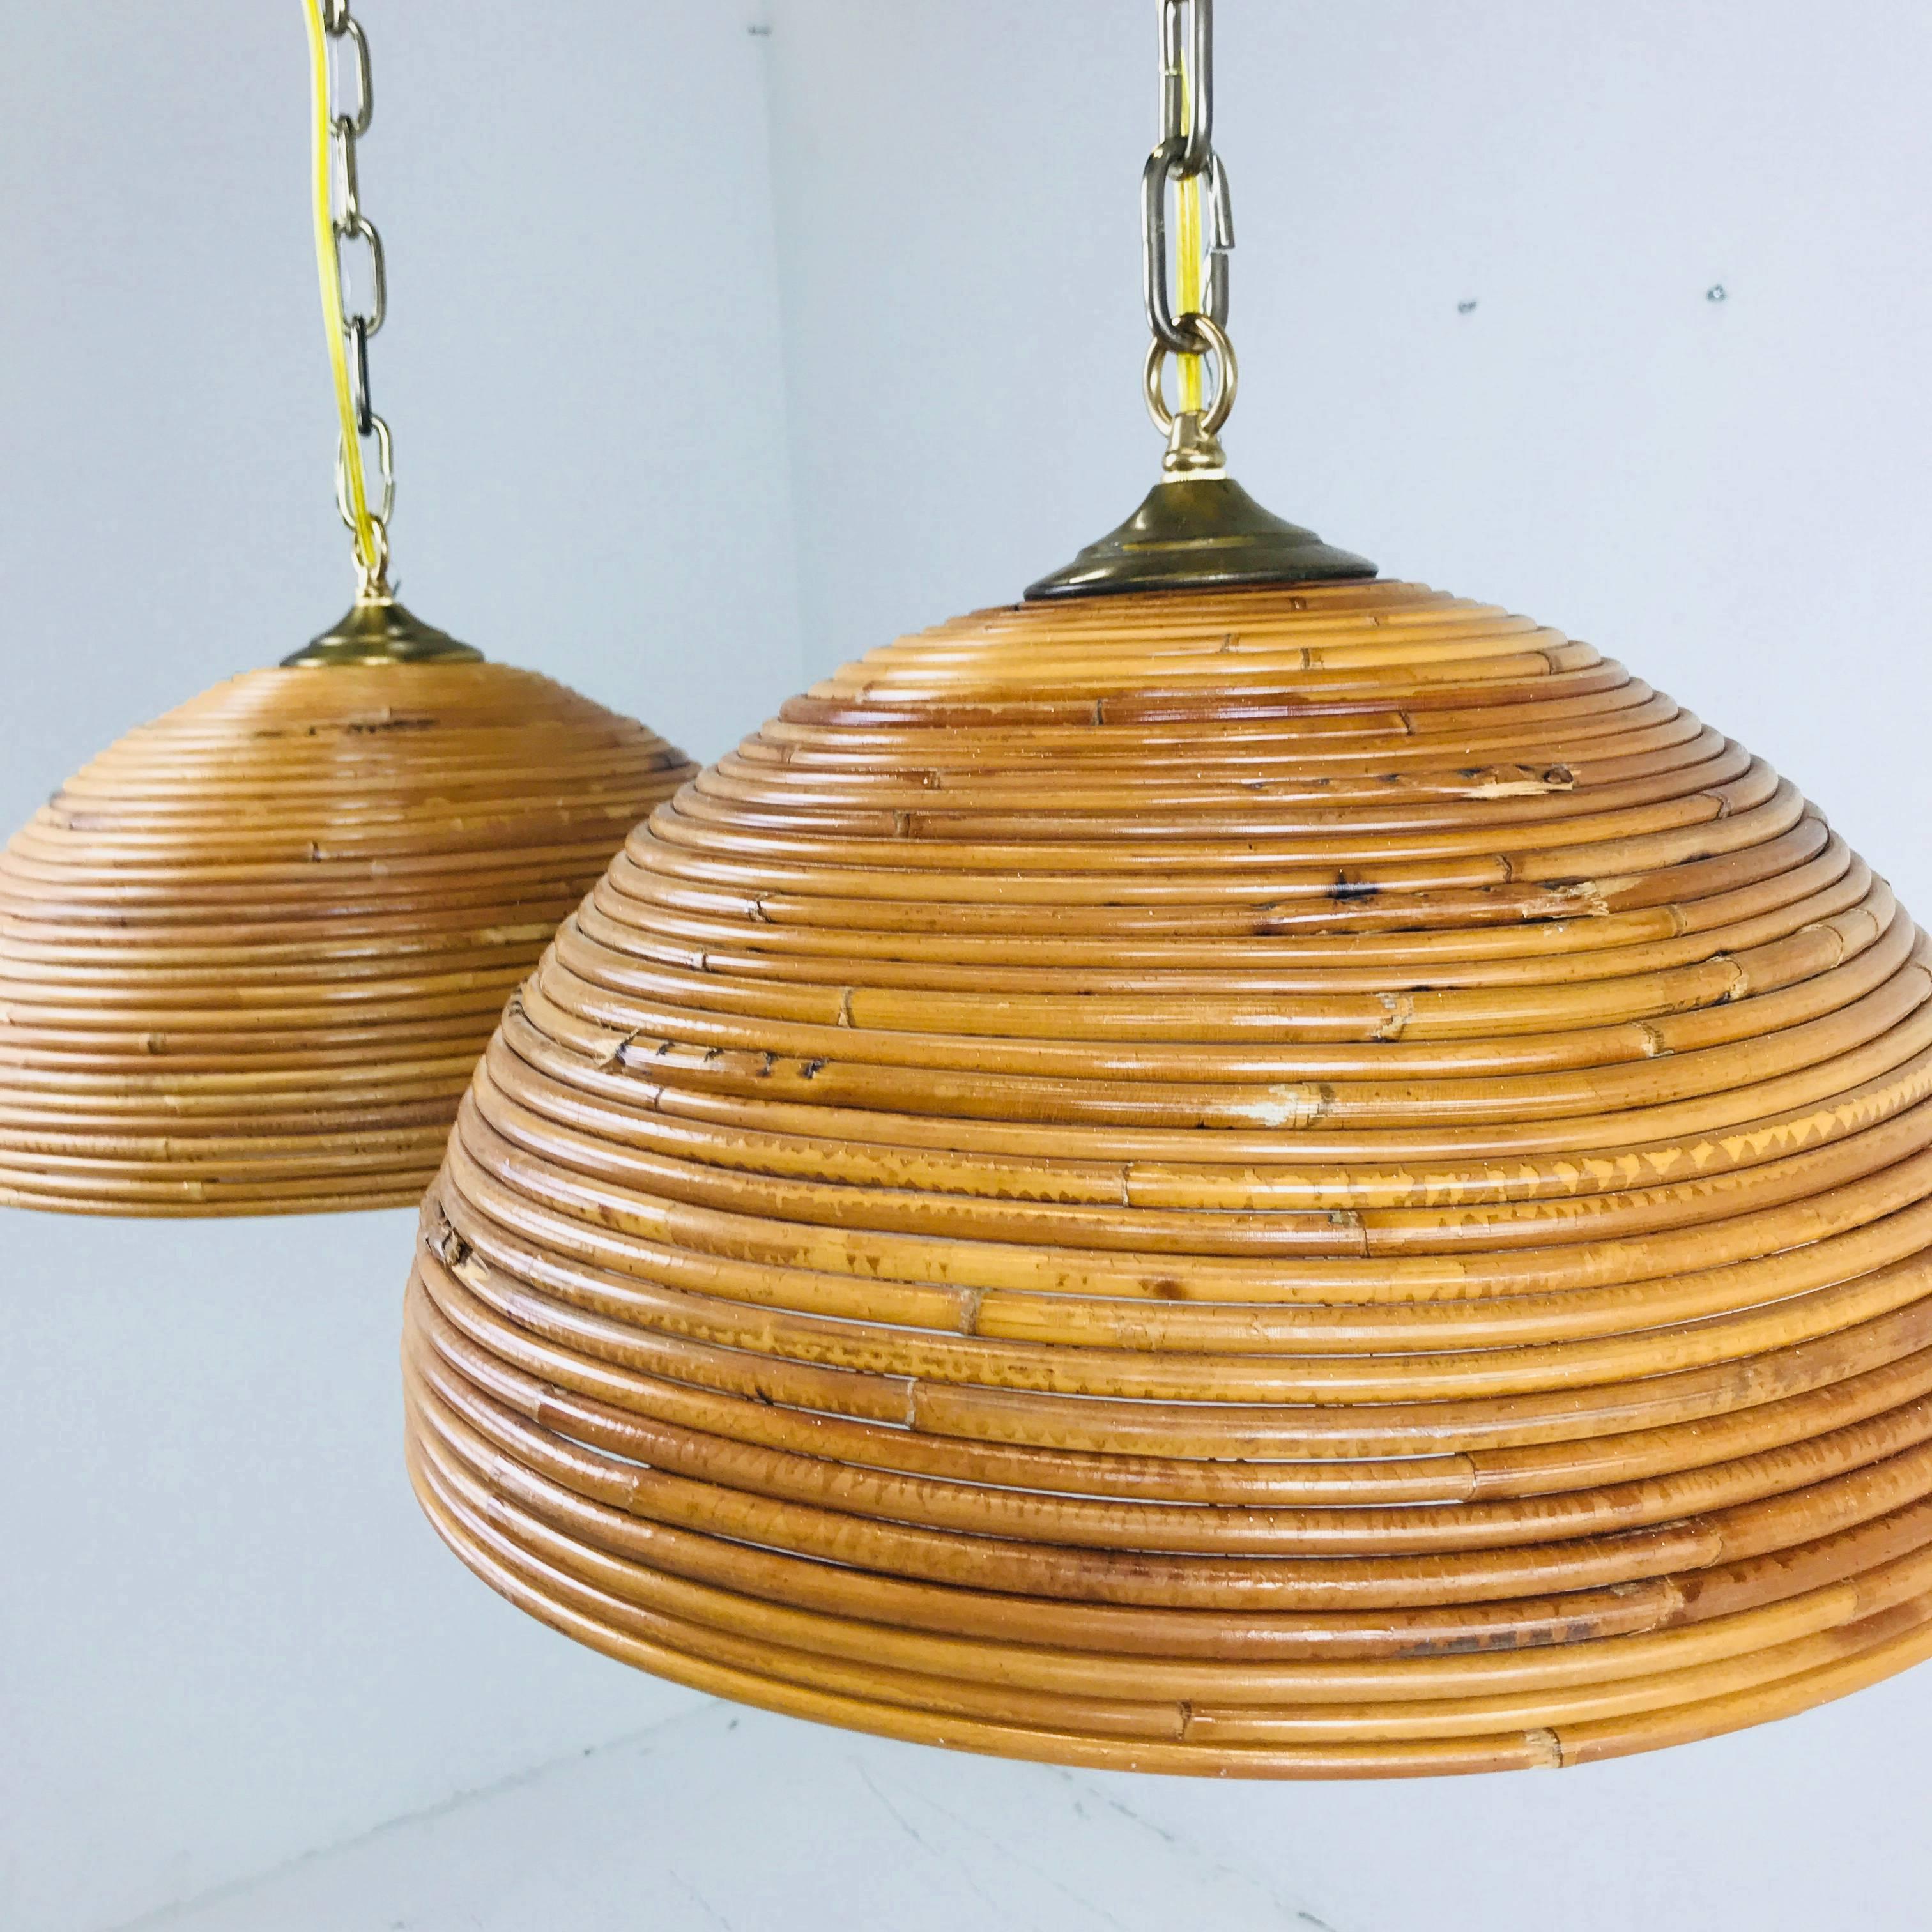 Pair of rattan dome pendants. Rattan domes are in good condition with new wiring.

Dimensions:
17.5